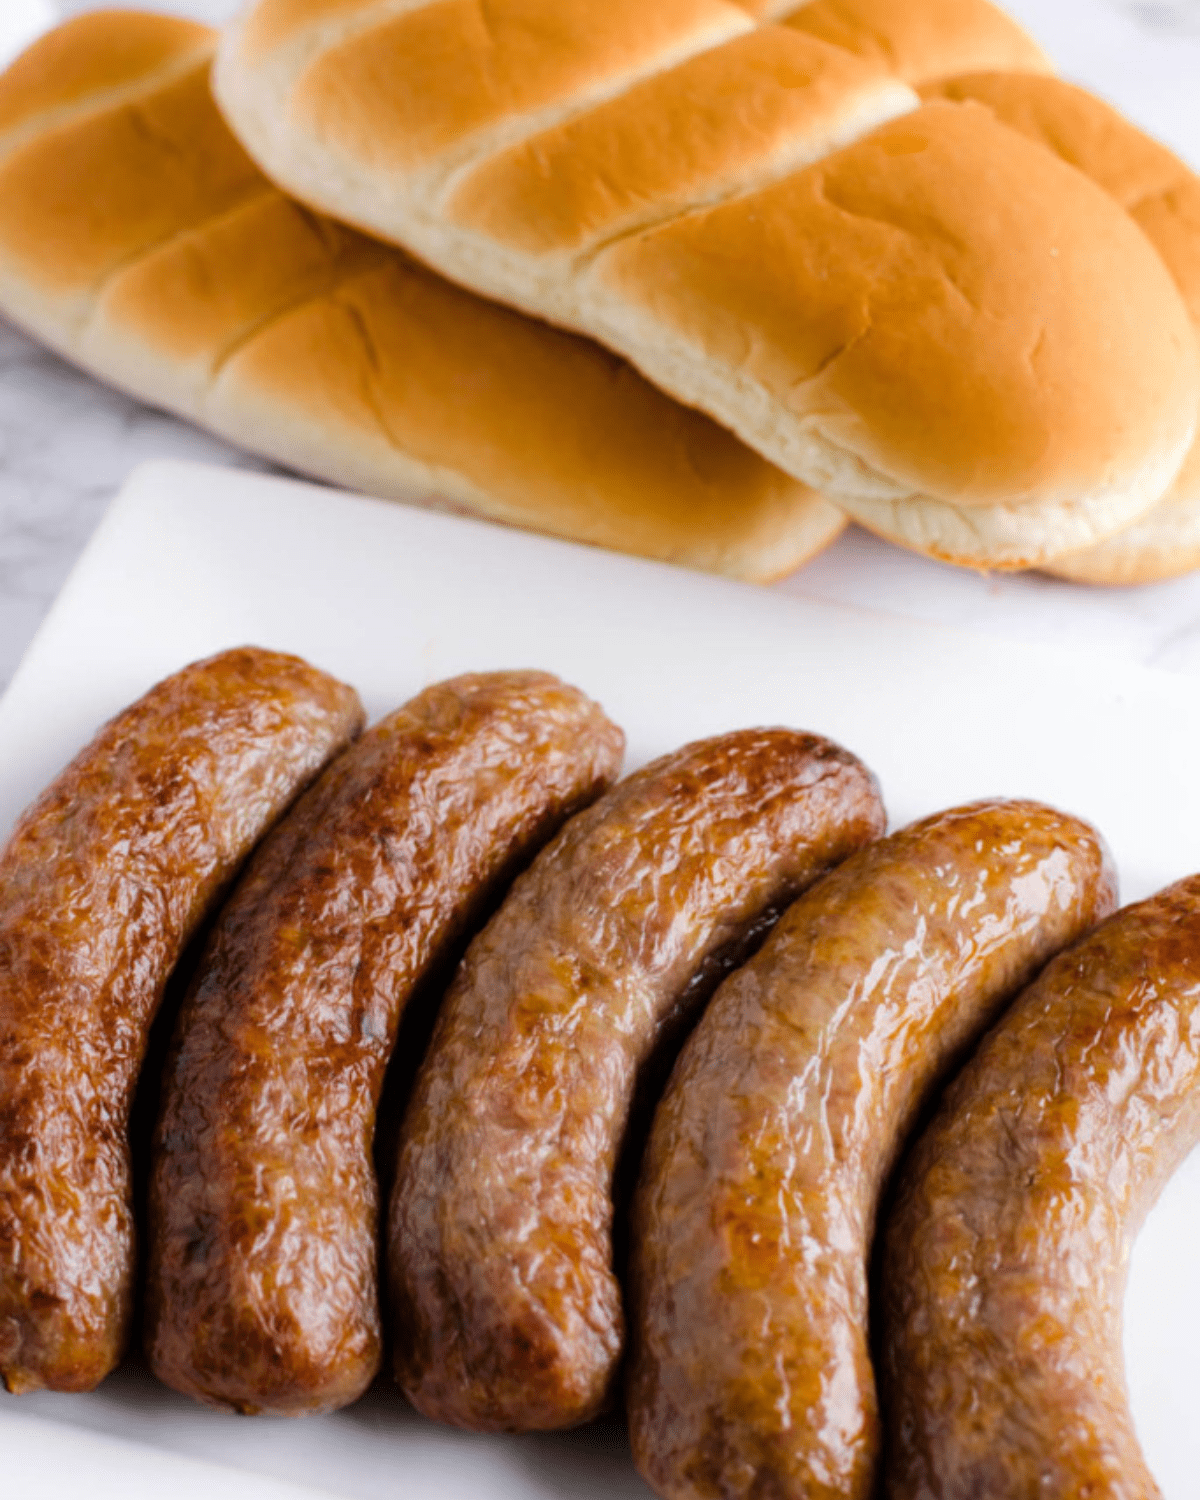 Air fryer brats on a plate with buns
